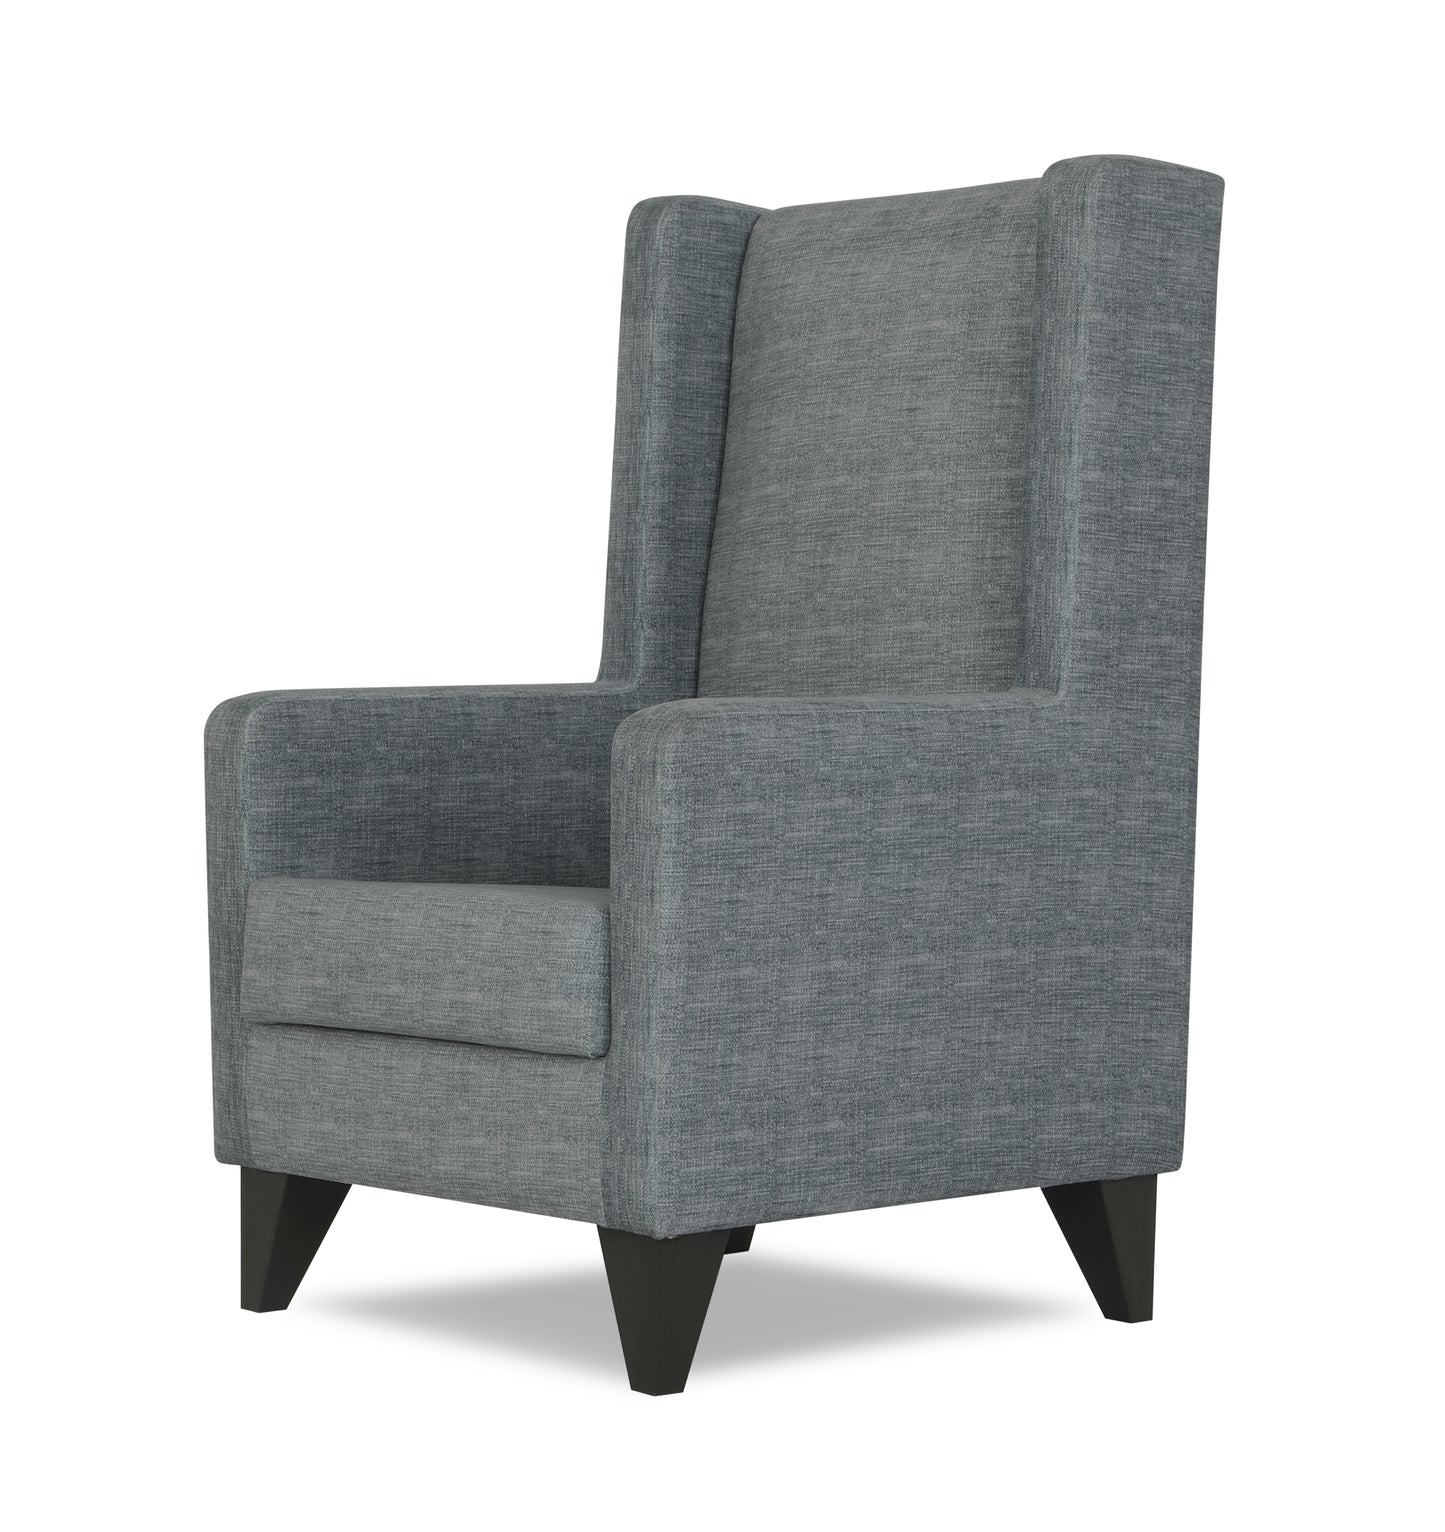 Adorn India Christopher 1 Seater Wing Chair Decent with Puffy (Grey)